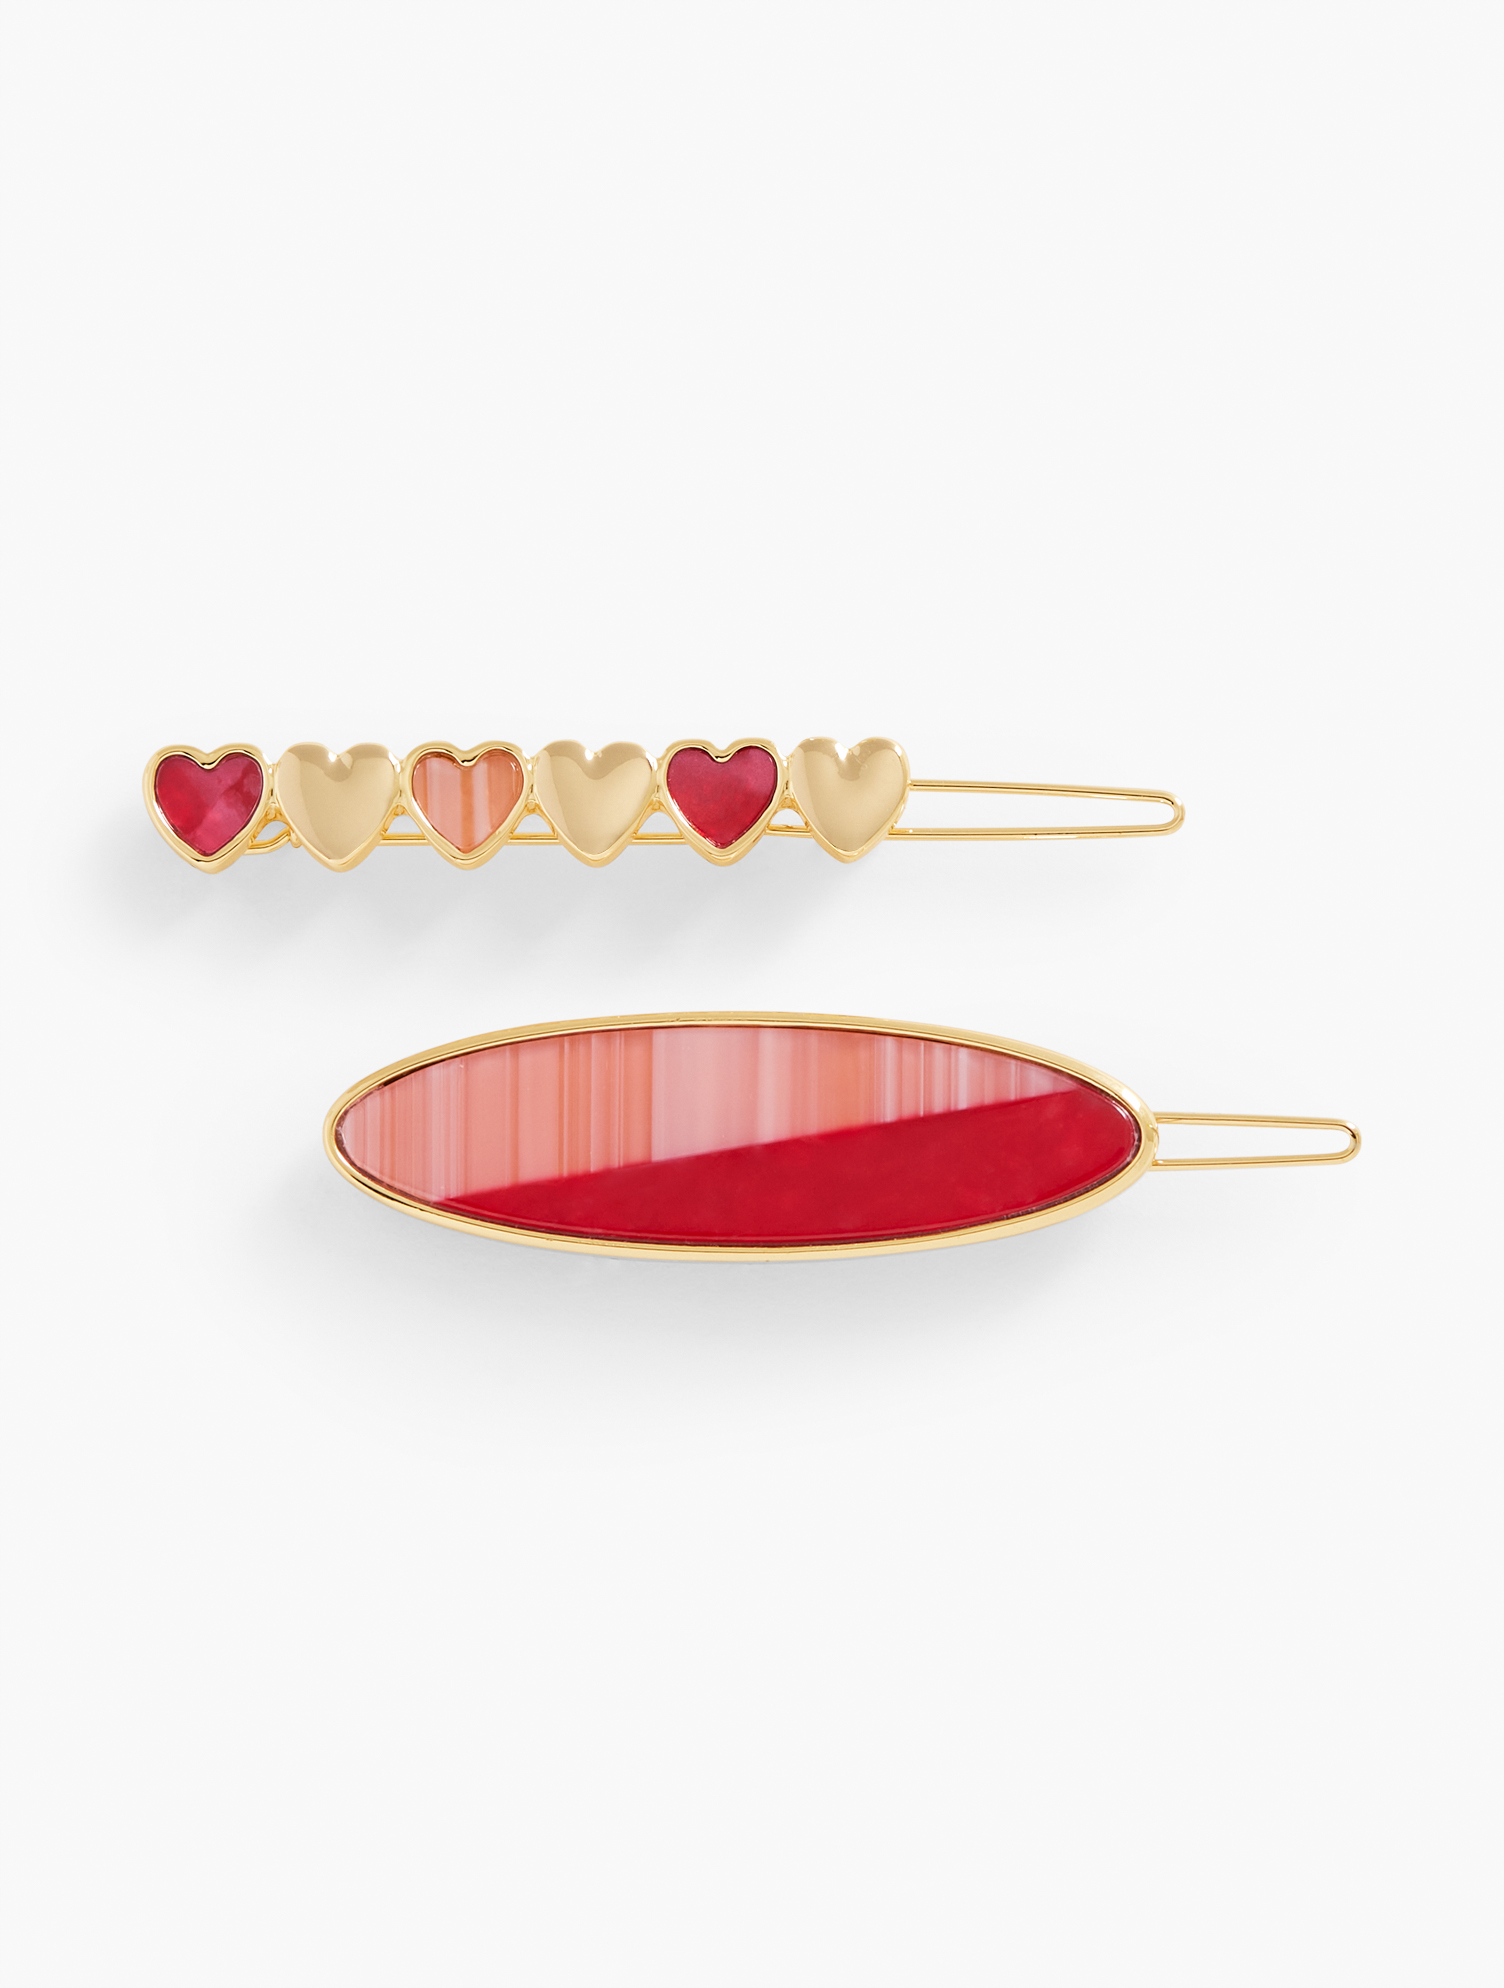 Talbots Multi Hearts Barrette Set - Red/gold - 001  In Red,gold